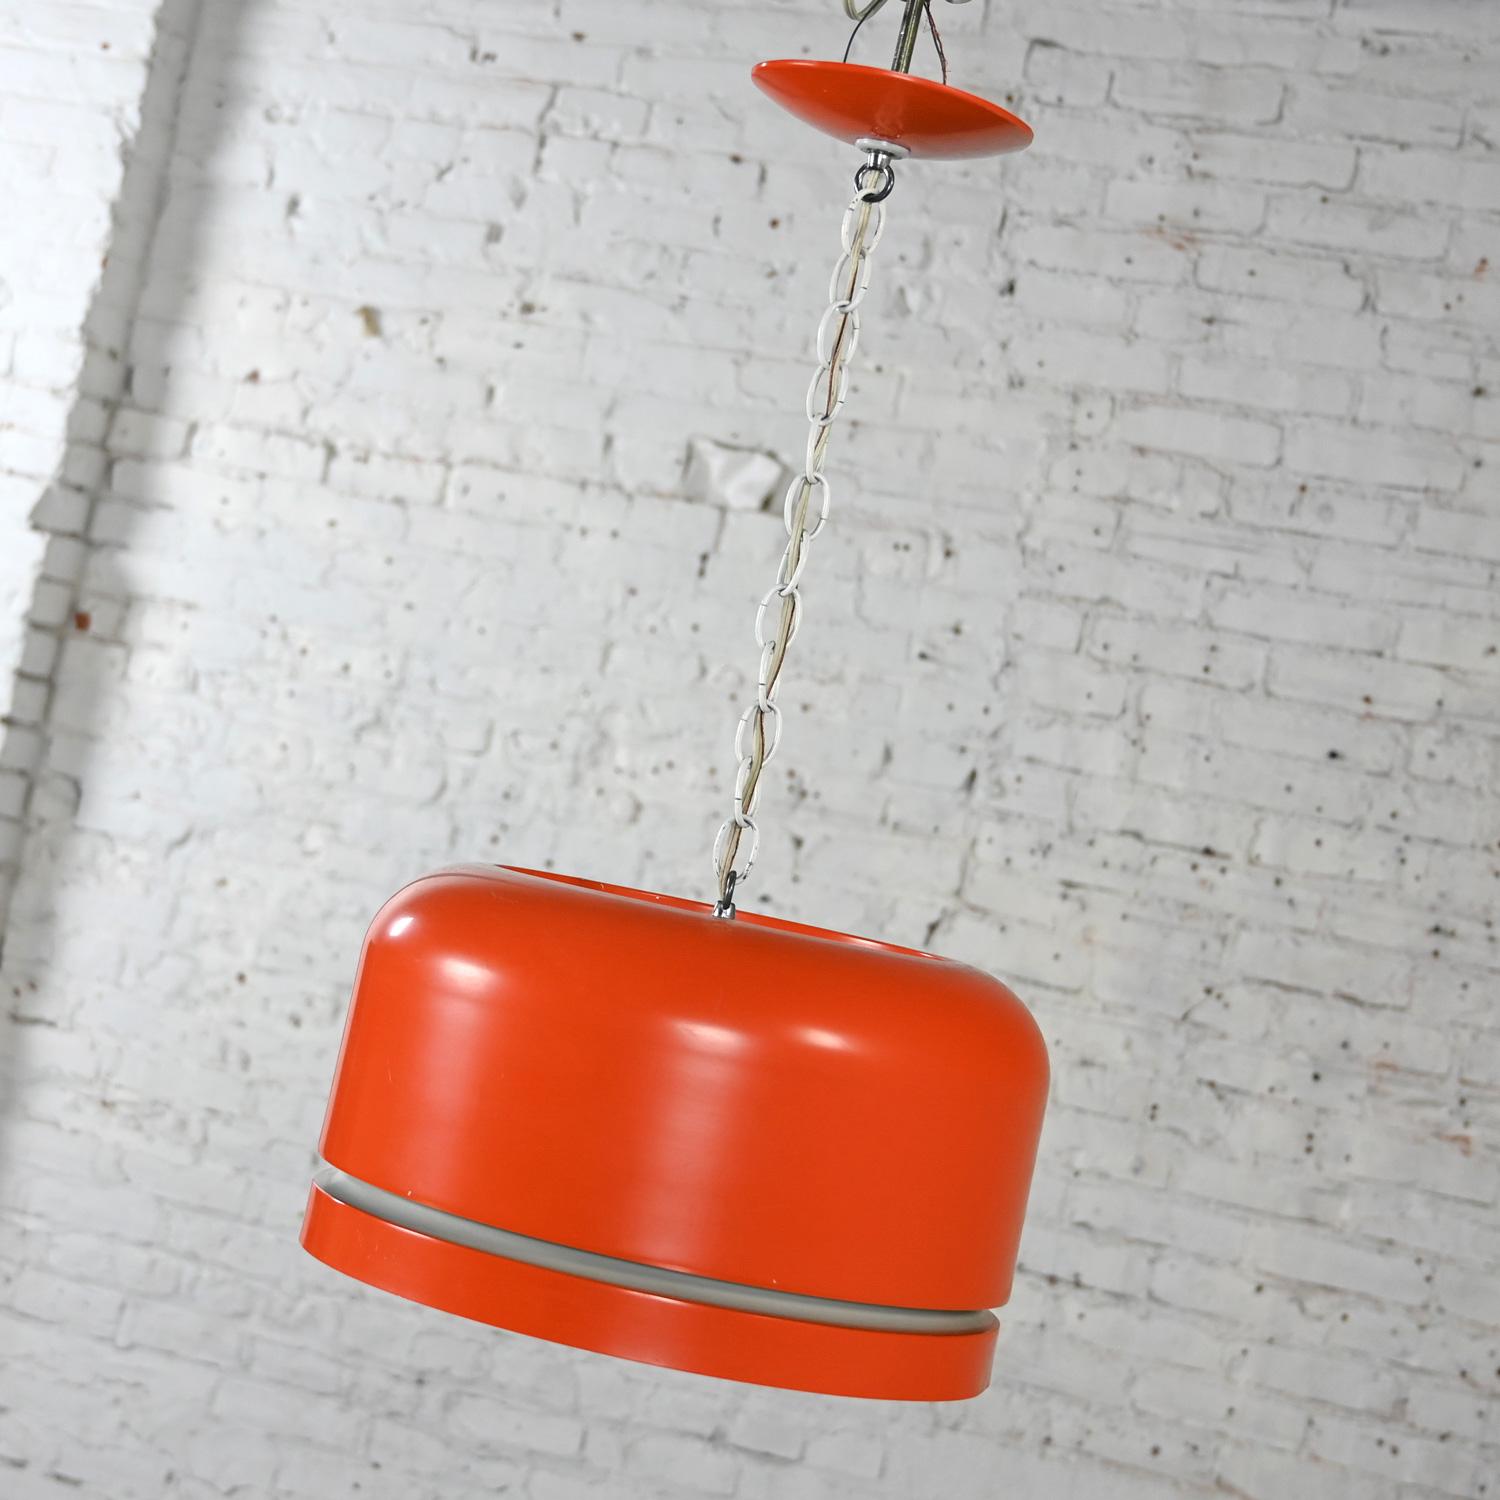 Marvelous vintage Mid-Century Modern orange dome or pendant hanging light fixture by Lightolier. Comprised of orange enameled metal, hardwired, 3 bulb socket, 3 way switch, white chain, and orange ceiling canopy. Beautiful condition, keeping in mind